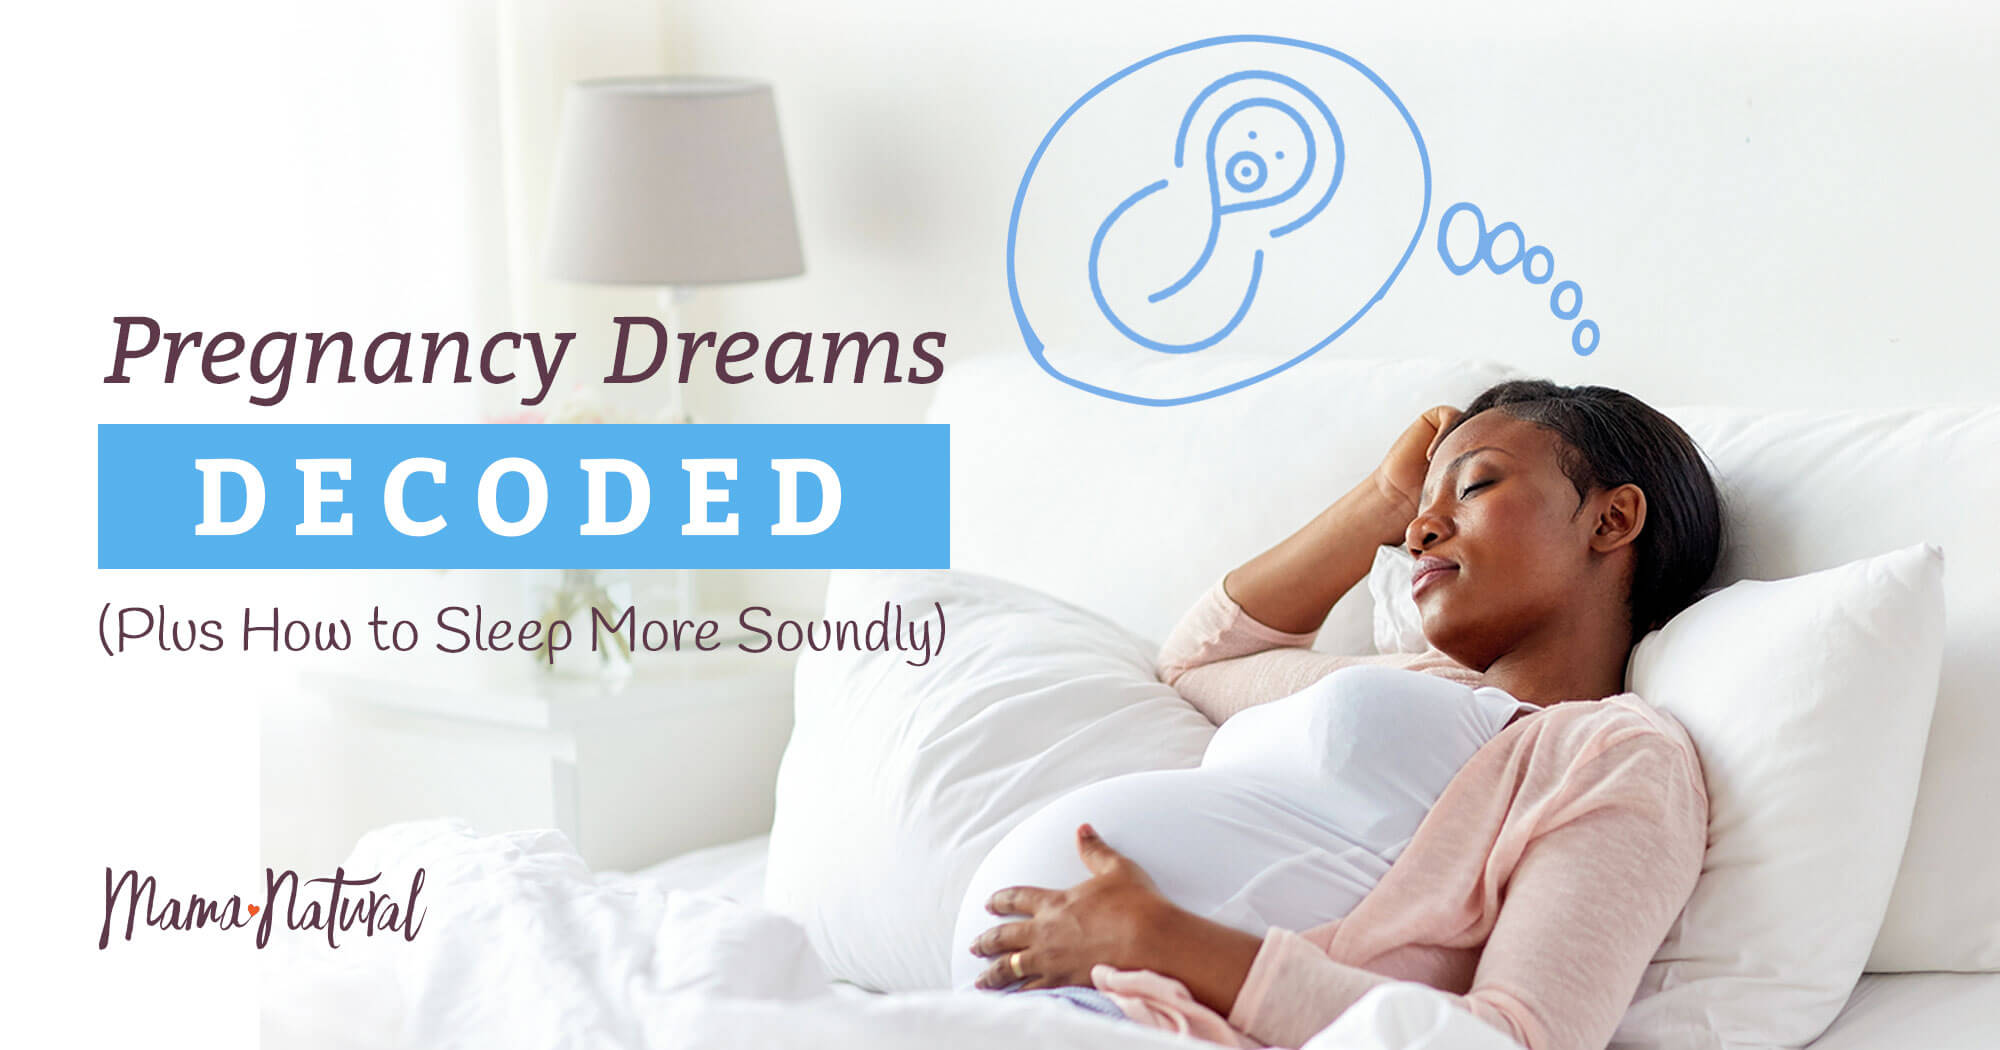 free download dreaming of being pregnant